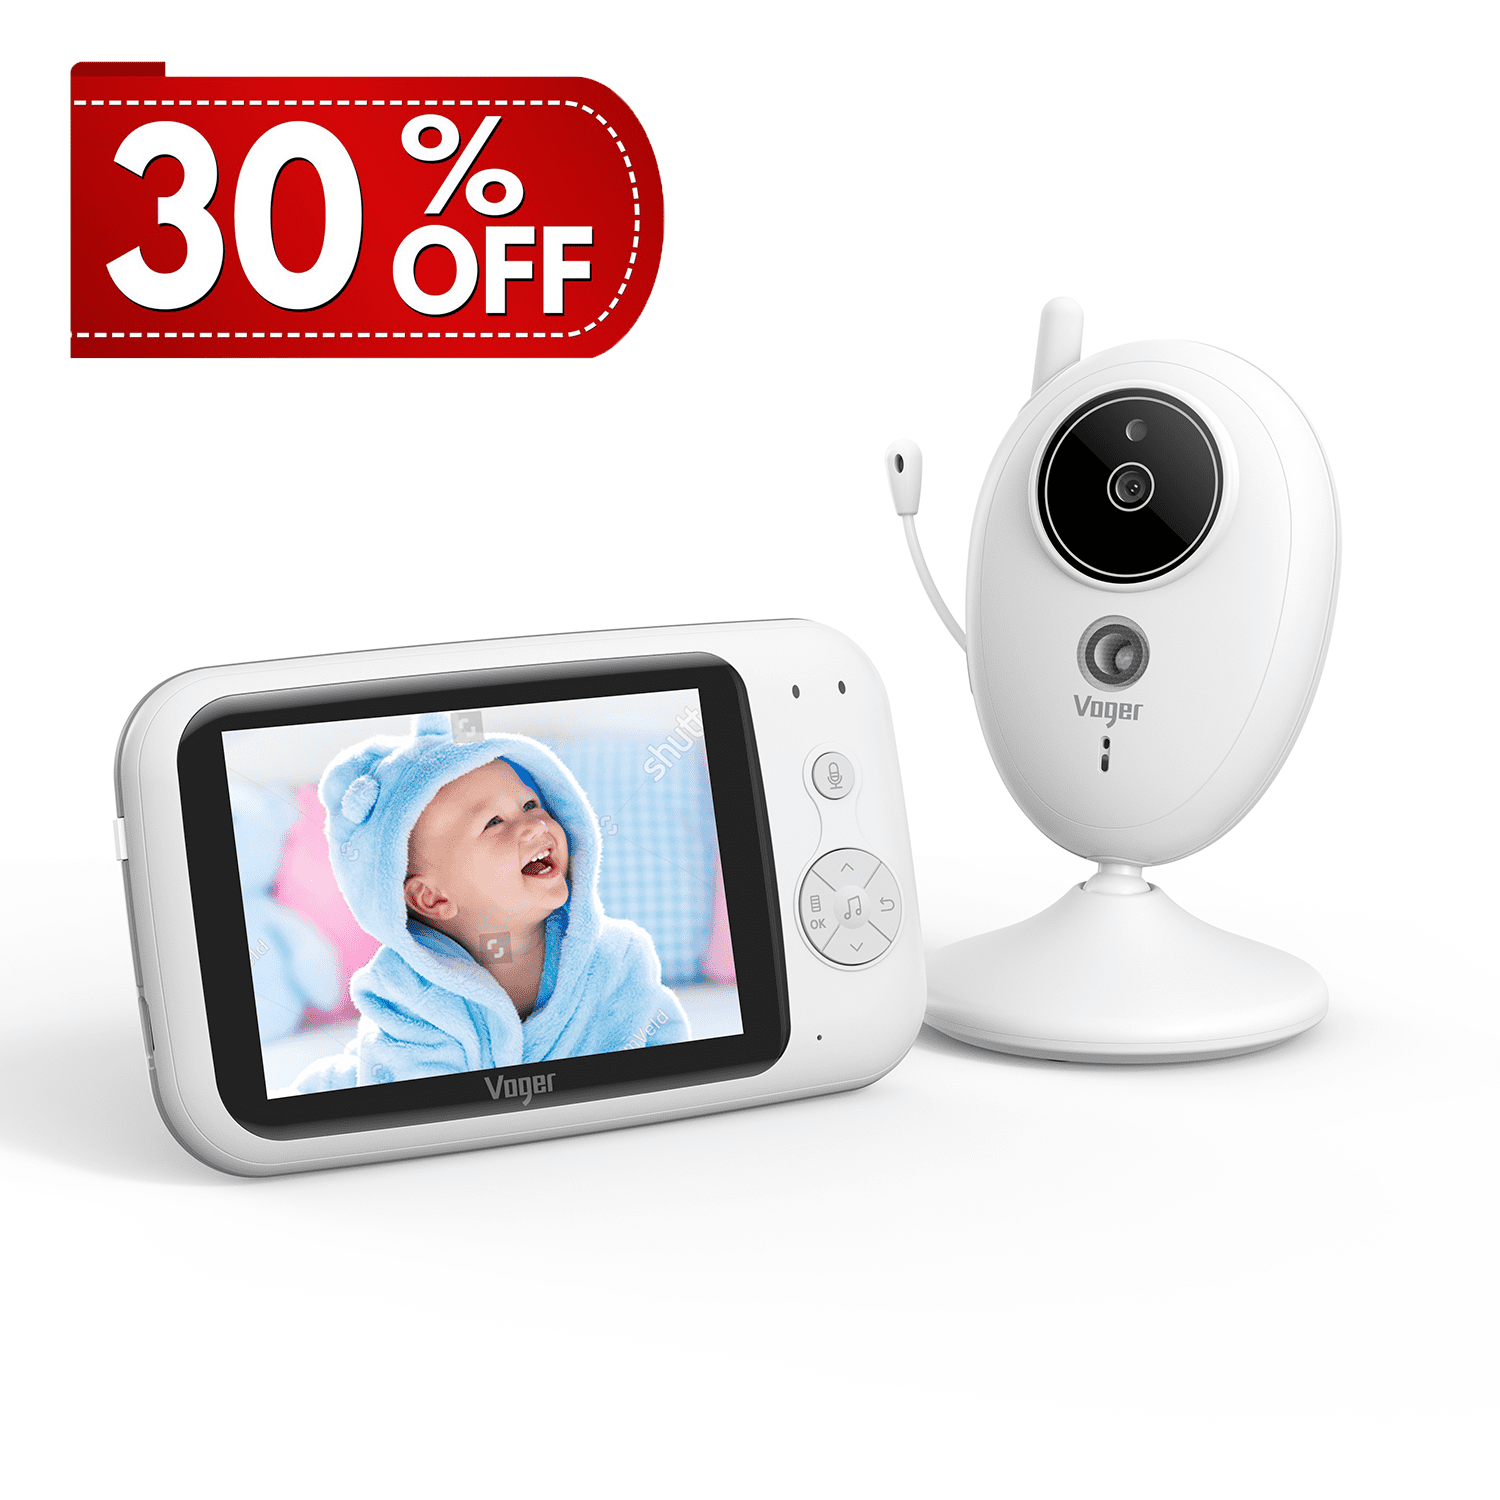 Baby Monitor with Digital Camera TOGUARD 3.5 Inch 2.4GHz Wireless Video Baby Monitor 1000ft Range Transmission Night Vision 2-Way Talk VOX Wake-up Temperature Sensor Lullabies High Capacity Battery 